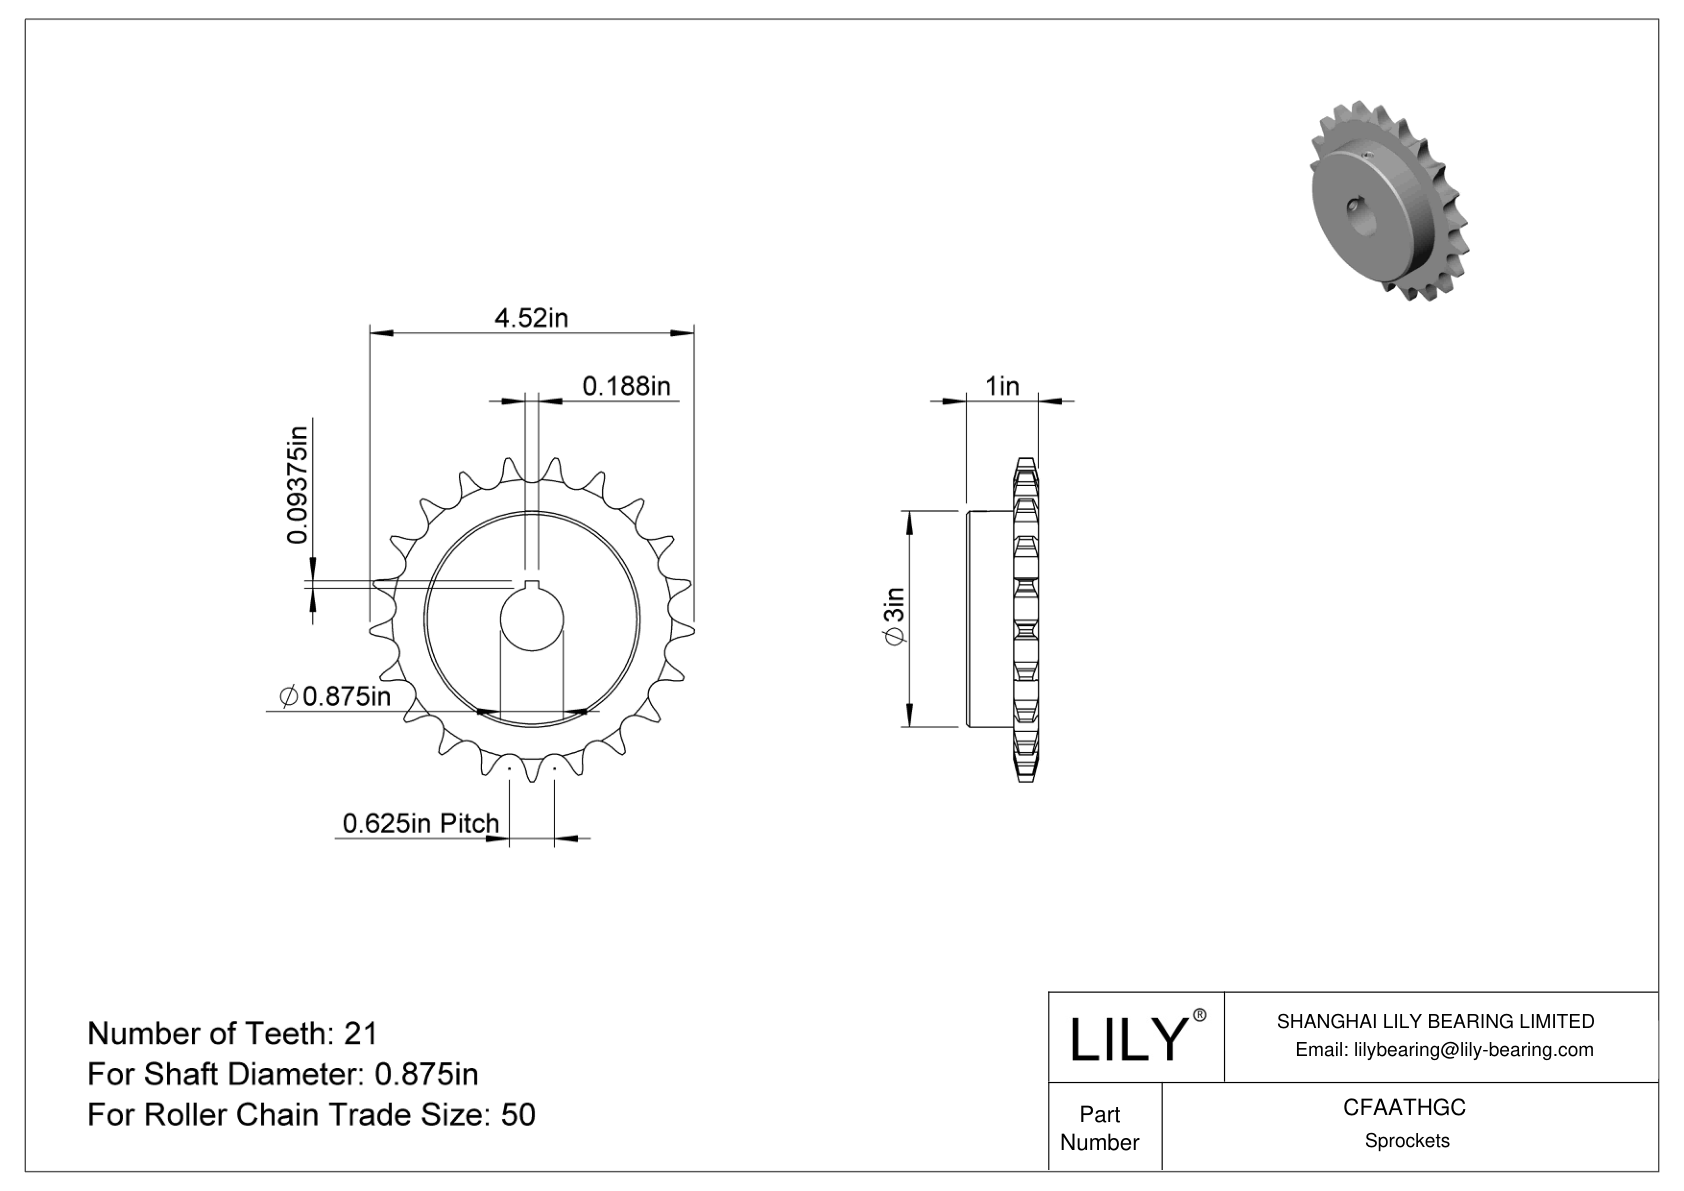 CFAATHGC Wear-Resistant Sprockets for ANSI Roller Chain cad drawing